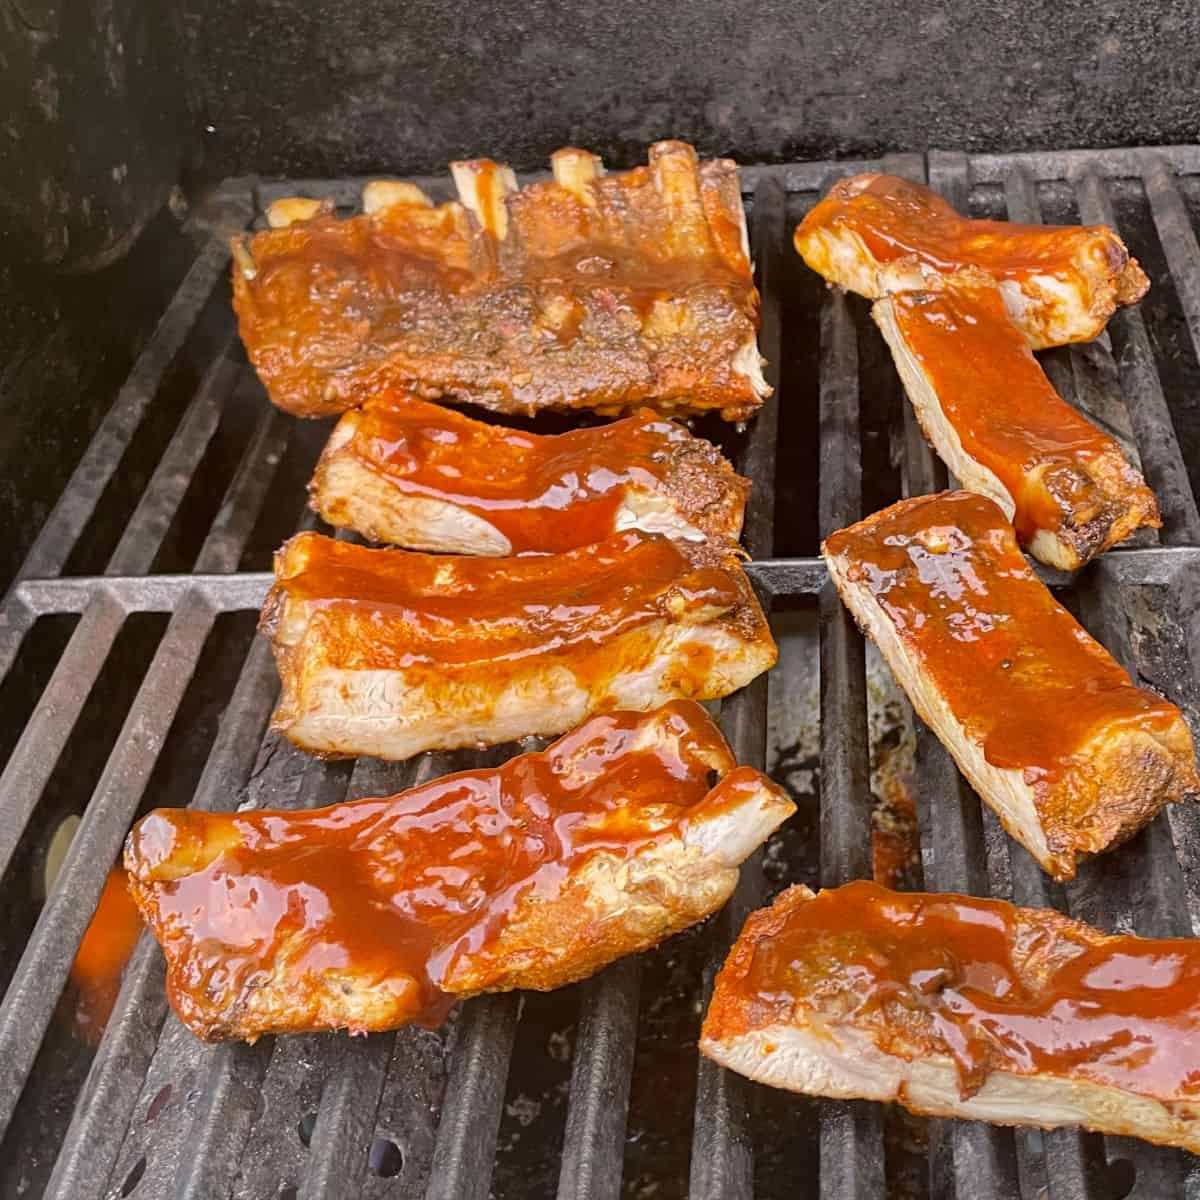 Grilled ribs being brushed with BBQ sauce.